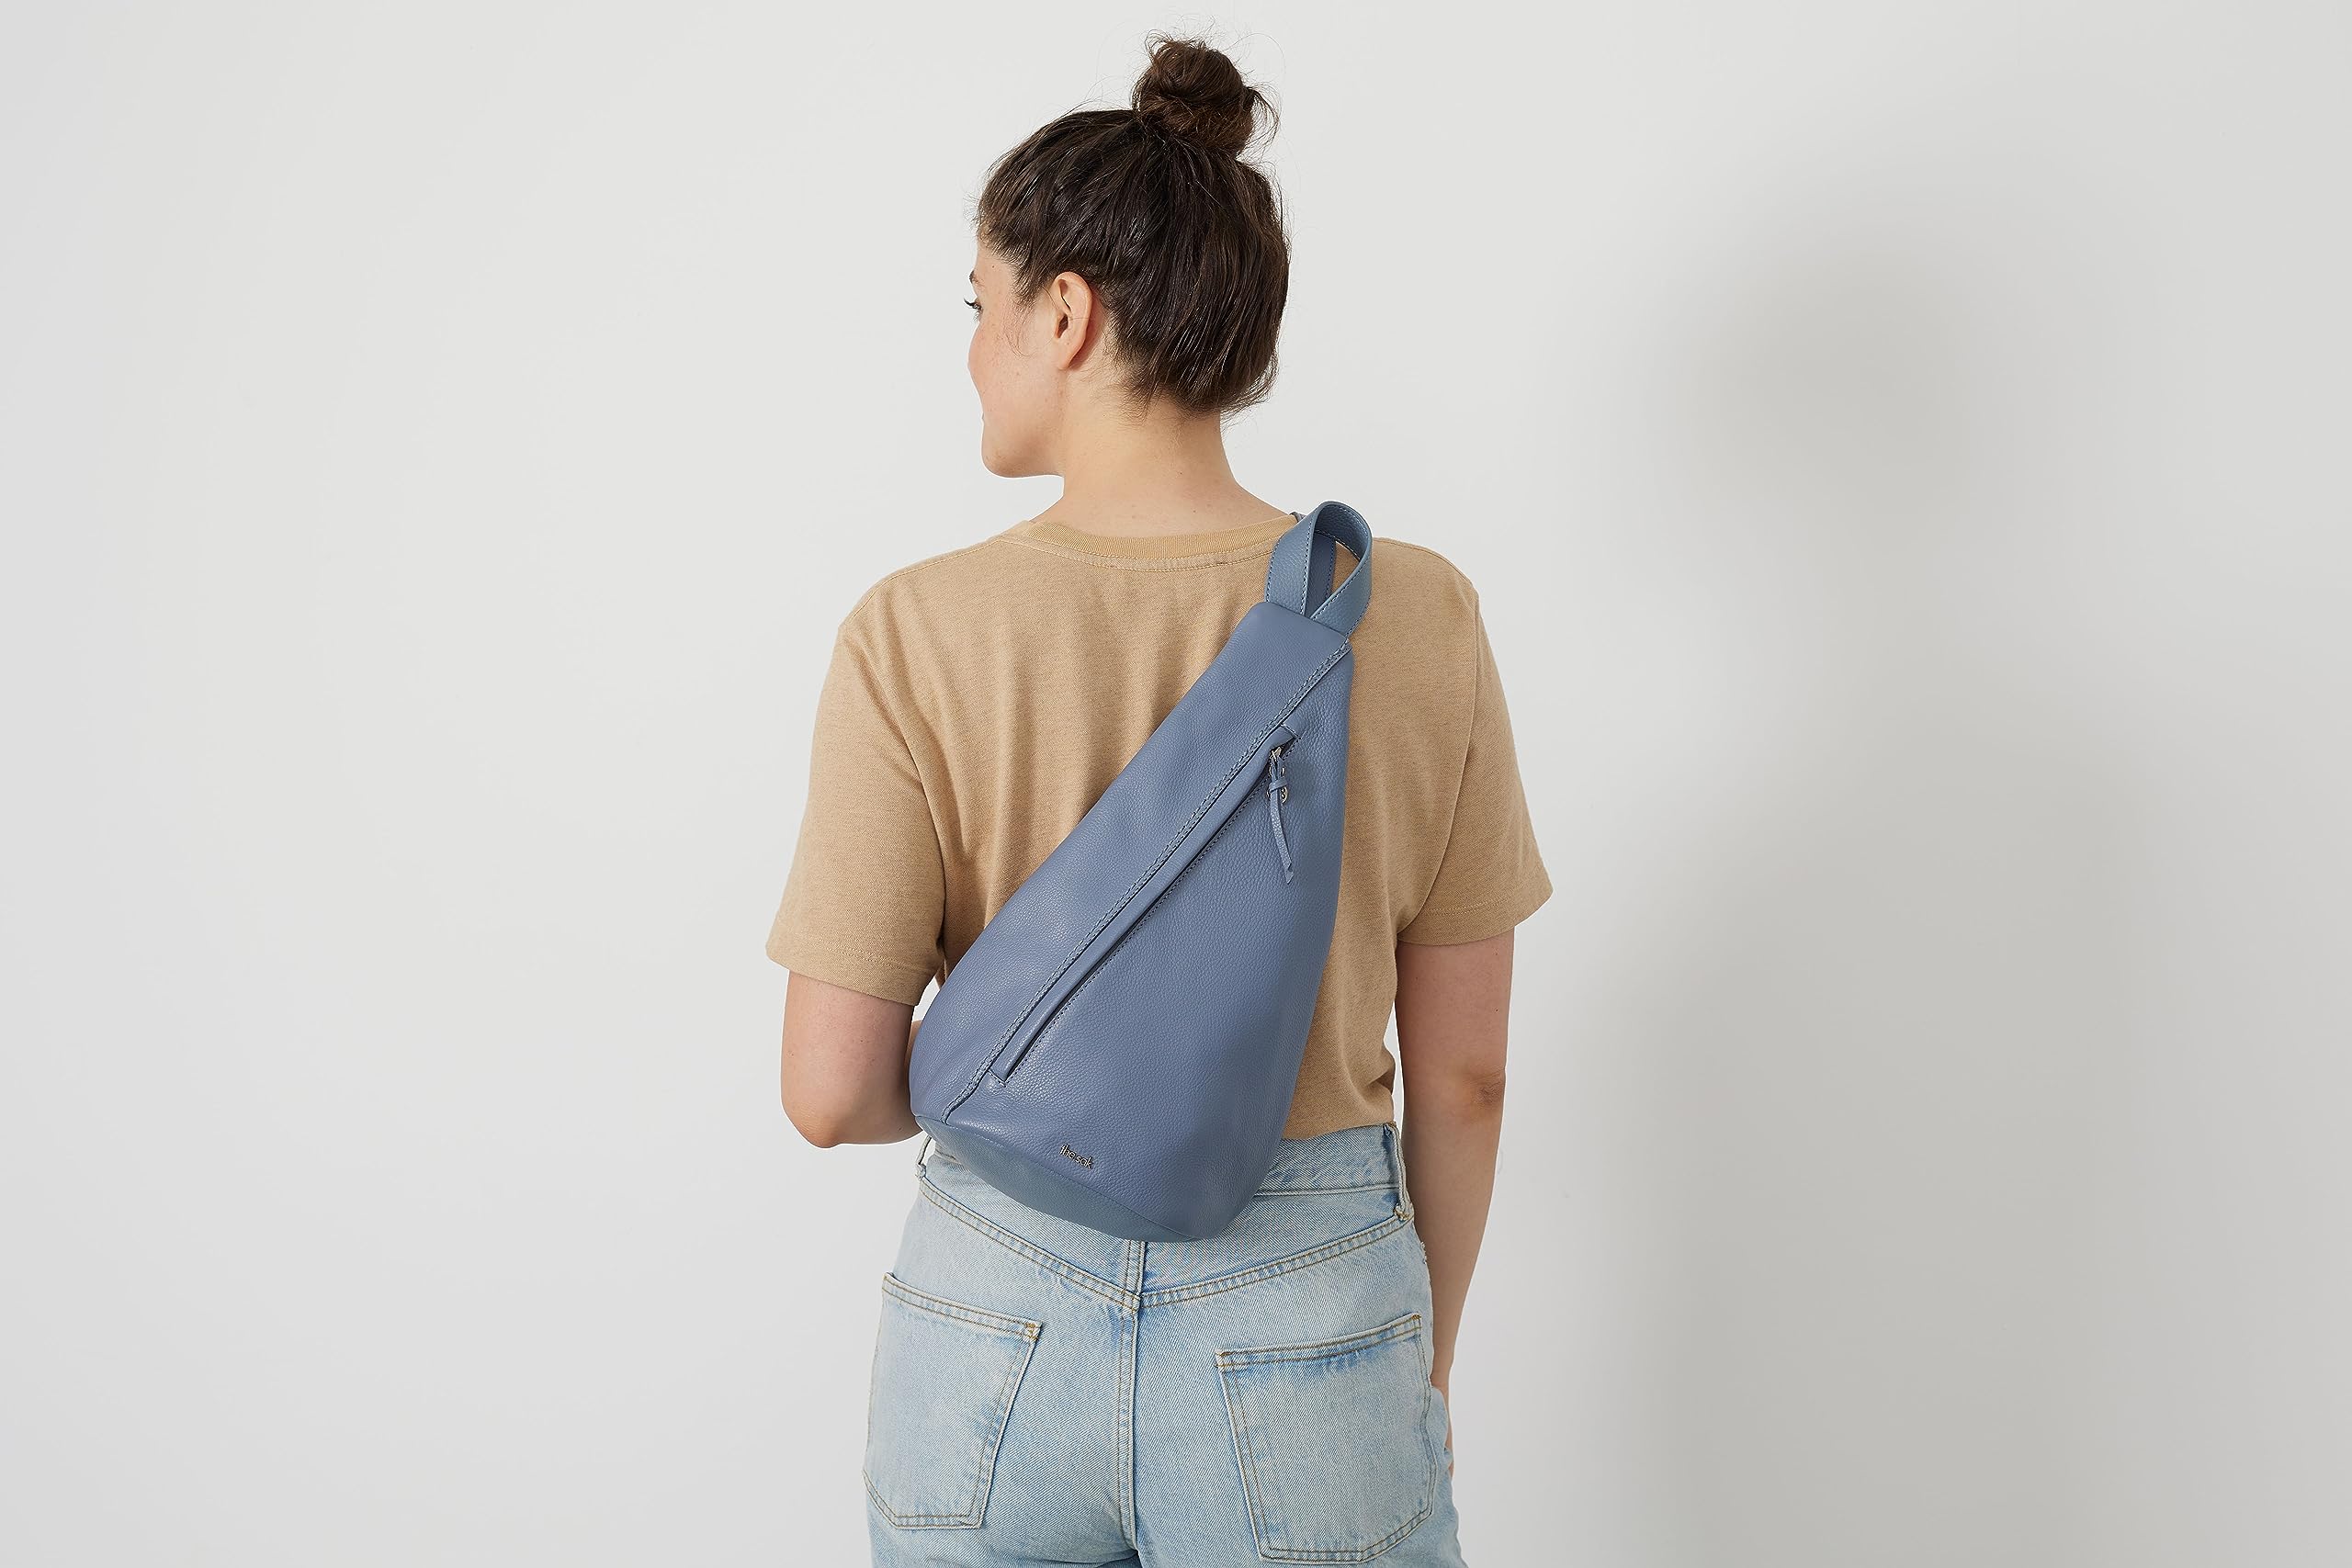 The Sak Geo Sling Backpack in Leather, Convertible Design, Tobacco